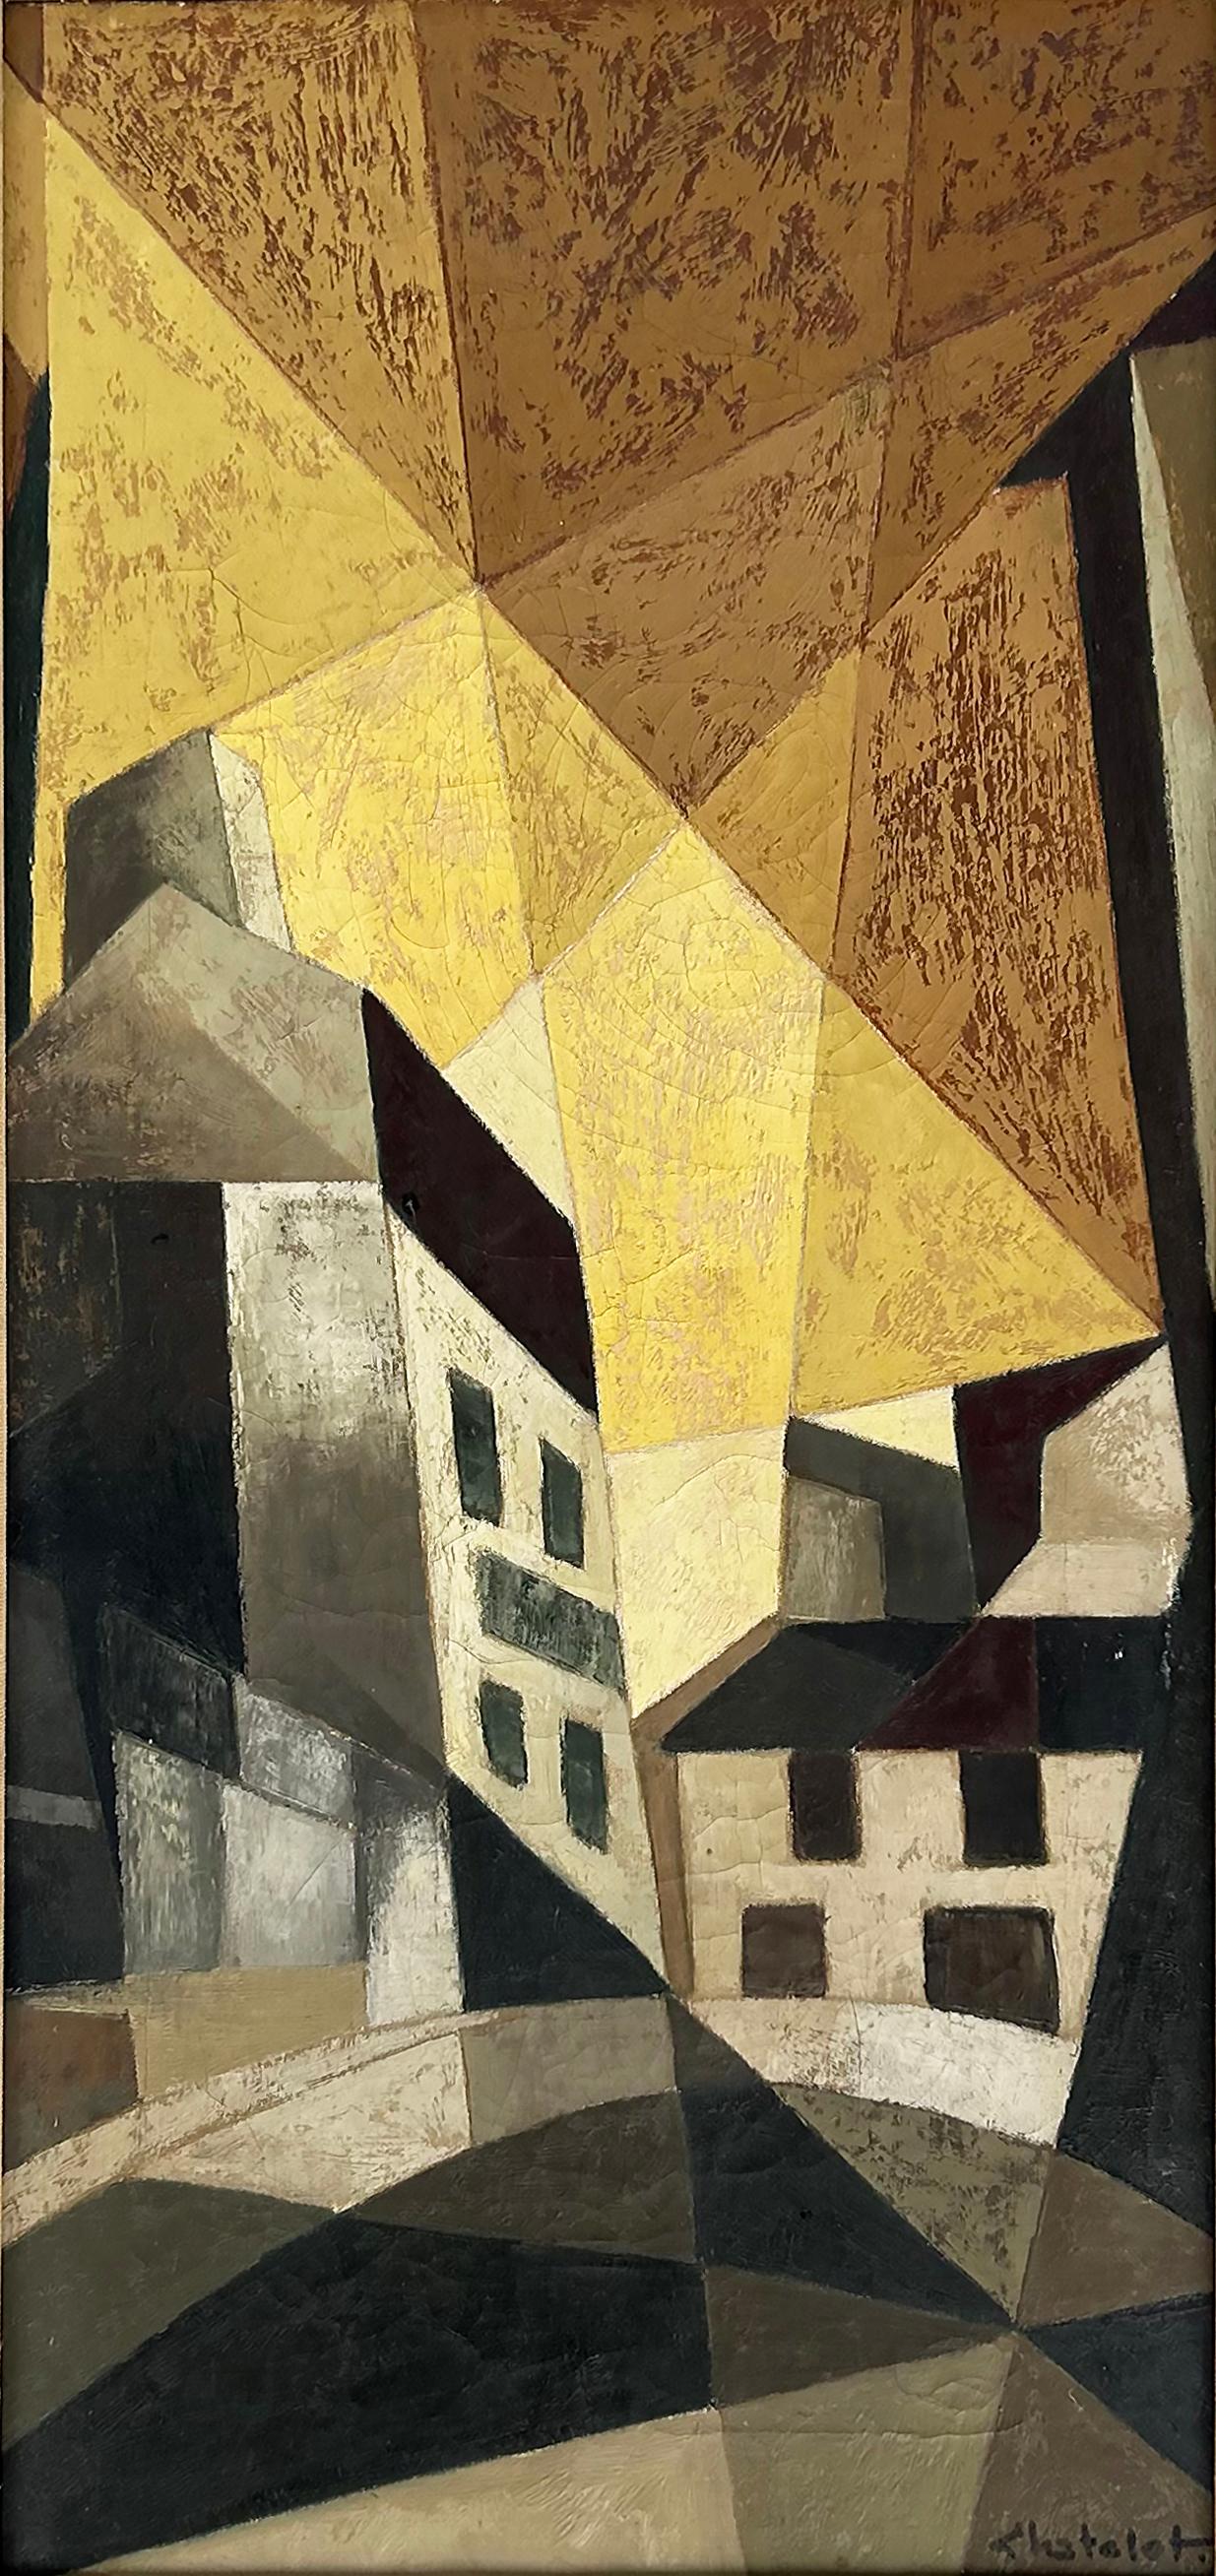 Mid-century Abstract Paris Oil Painting Rue Marvins Montmartre by Chatelet 

Offered for sale is a French early 20th-century cubist style oil on canvas titled 